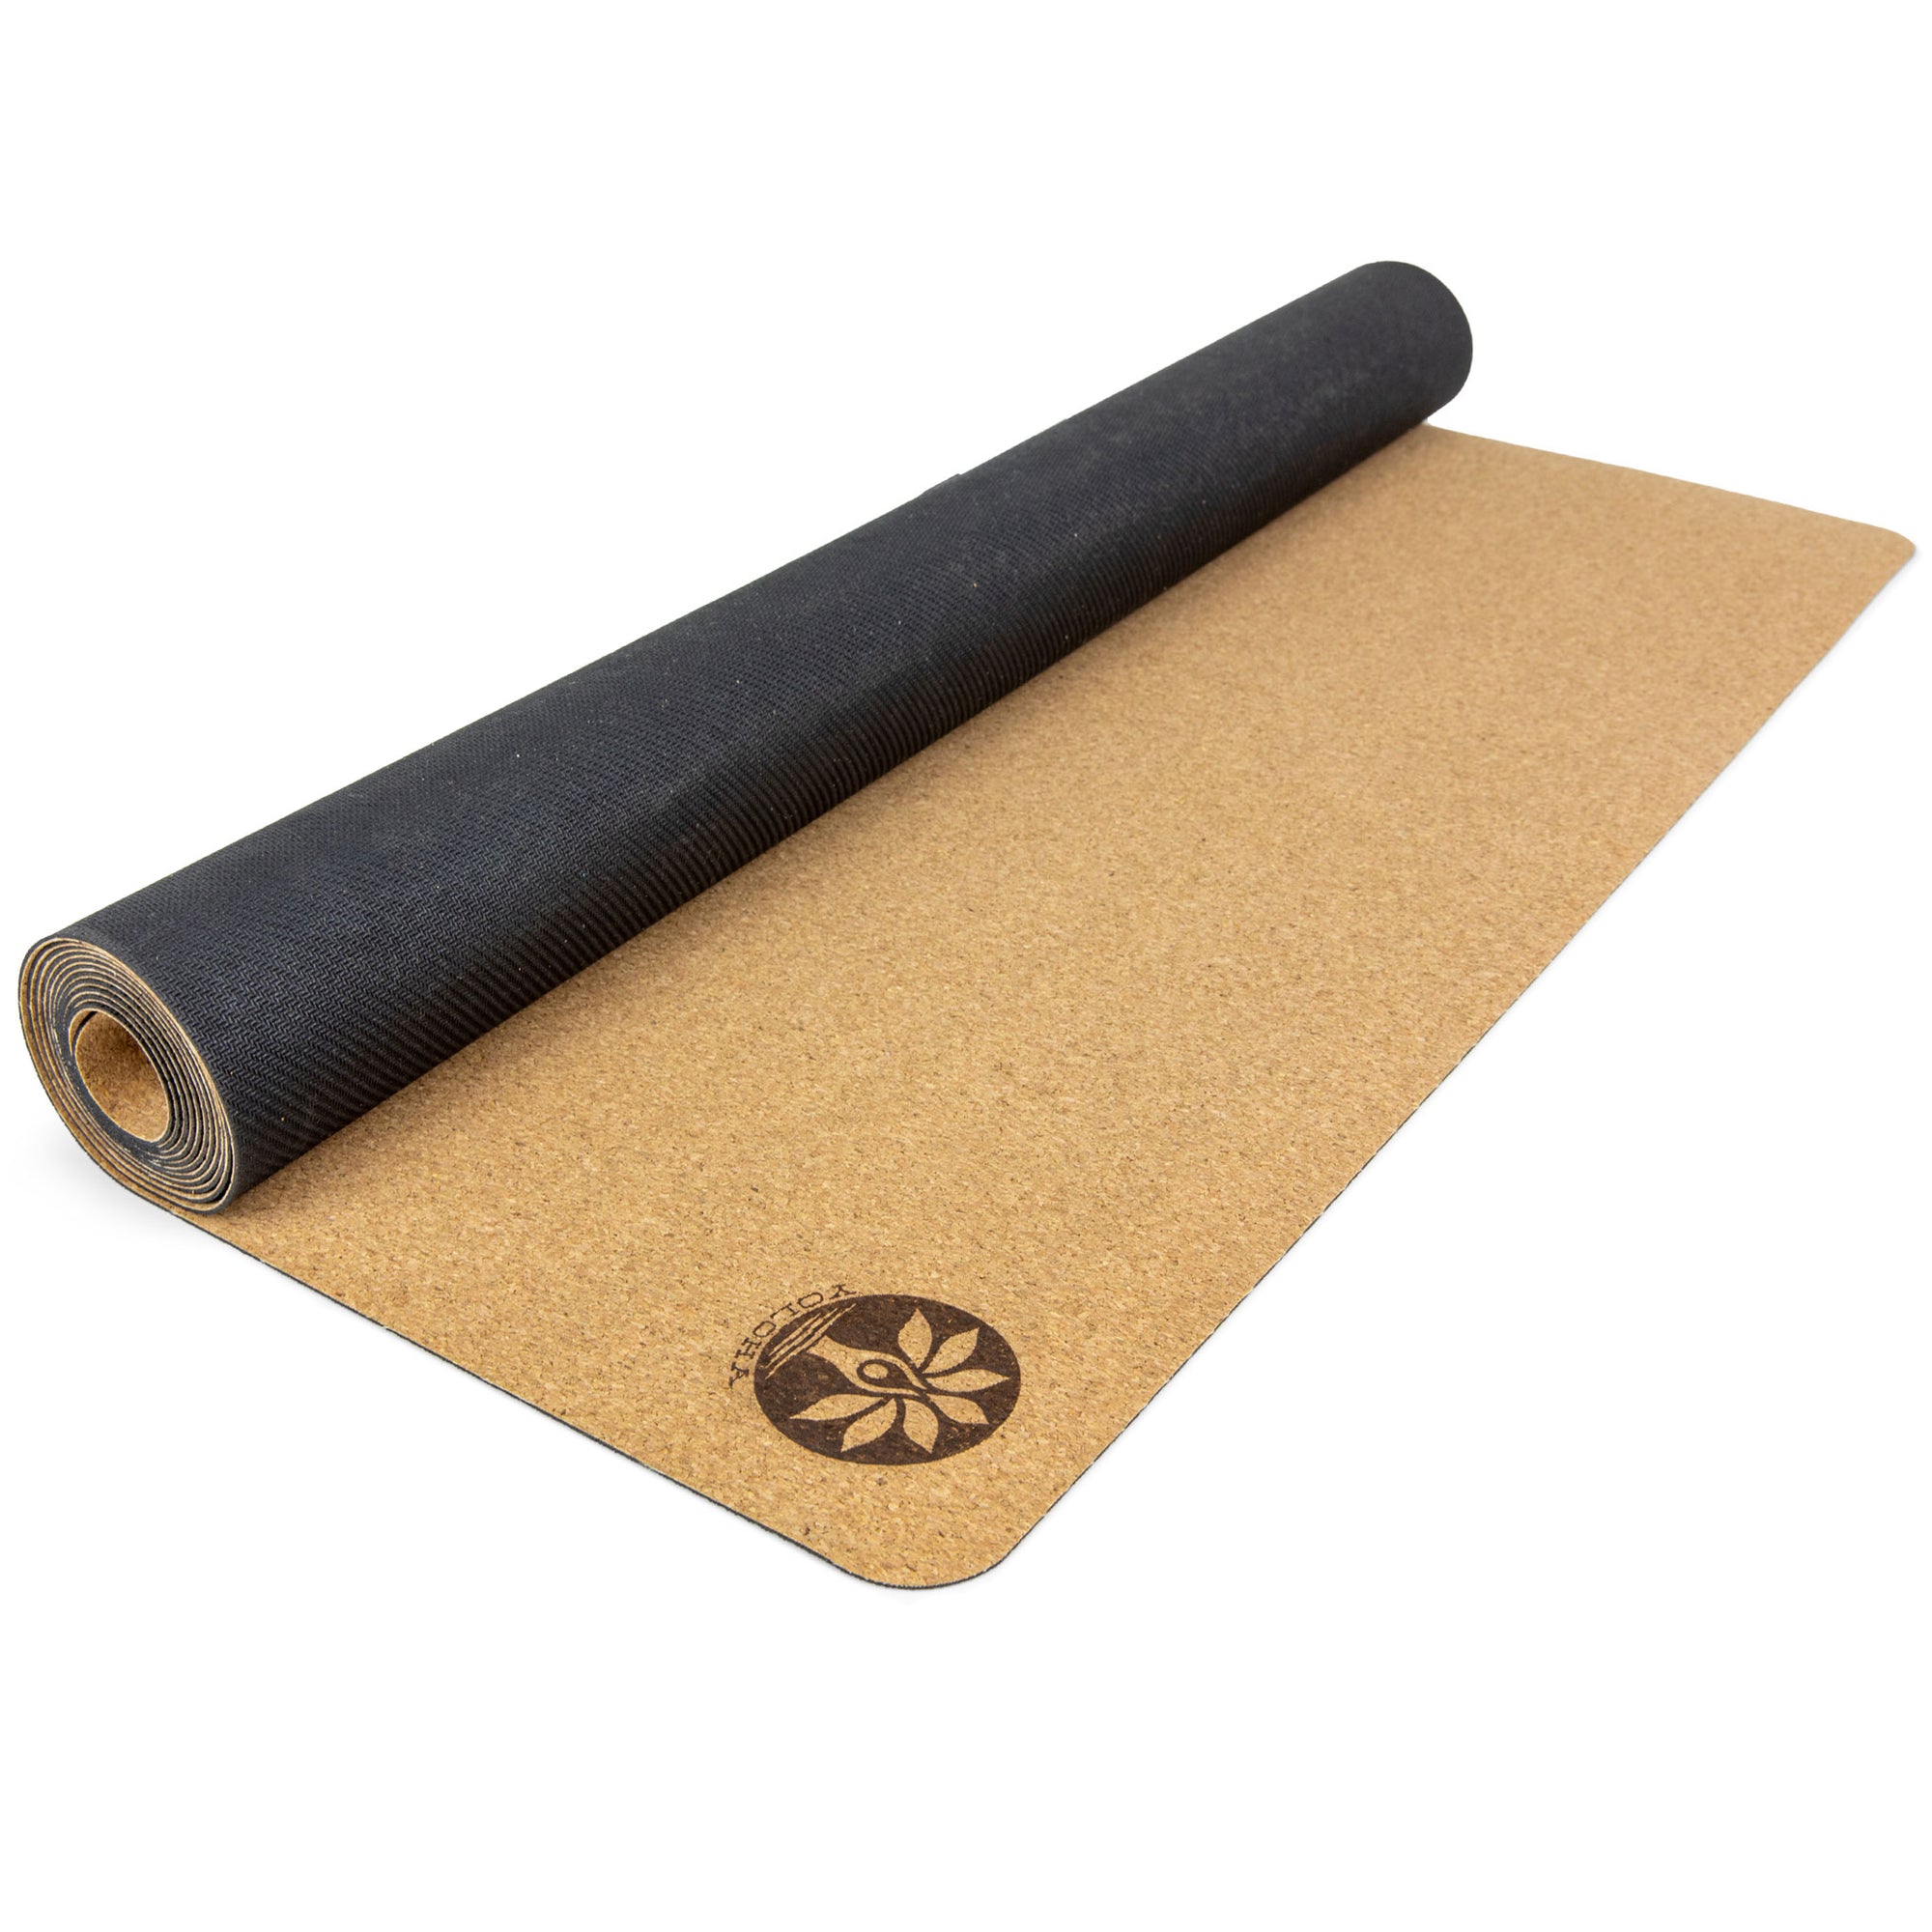 Custom Cork Yoga Mat - Natural Cork and Rubber Personalized YOGA MAT 72 x  24 x 5mm or 3mm Thick. Non-slip, Best Eco-friendly Mat!